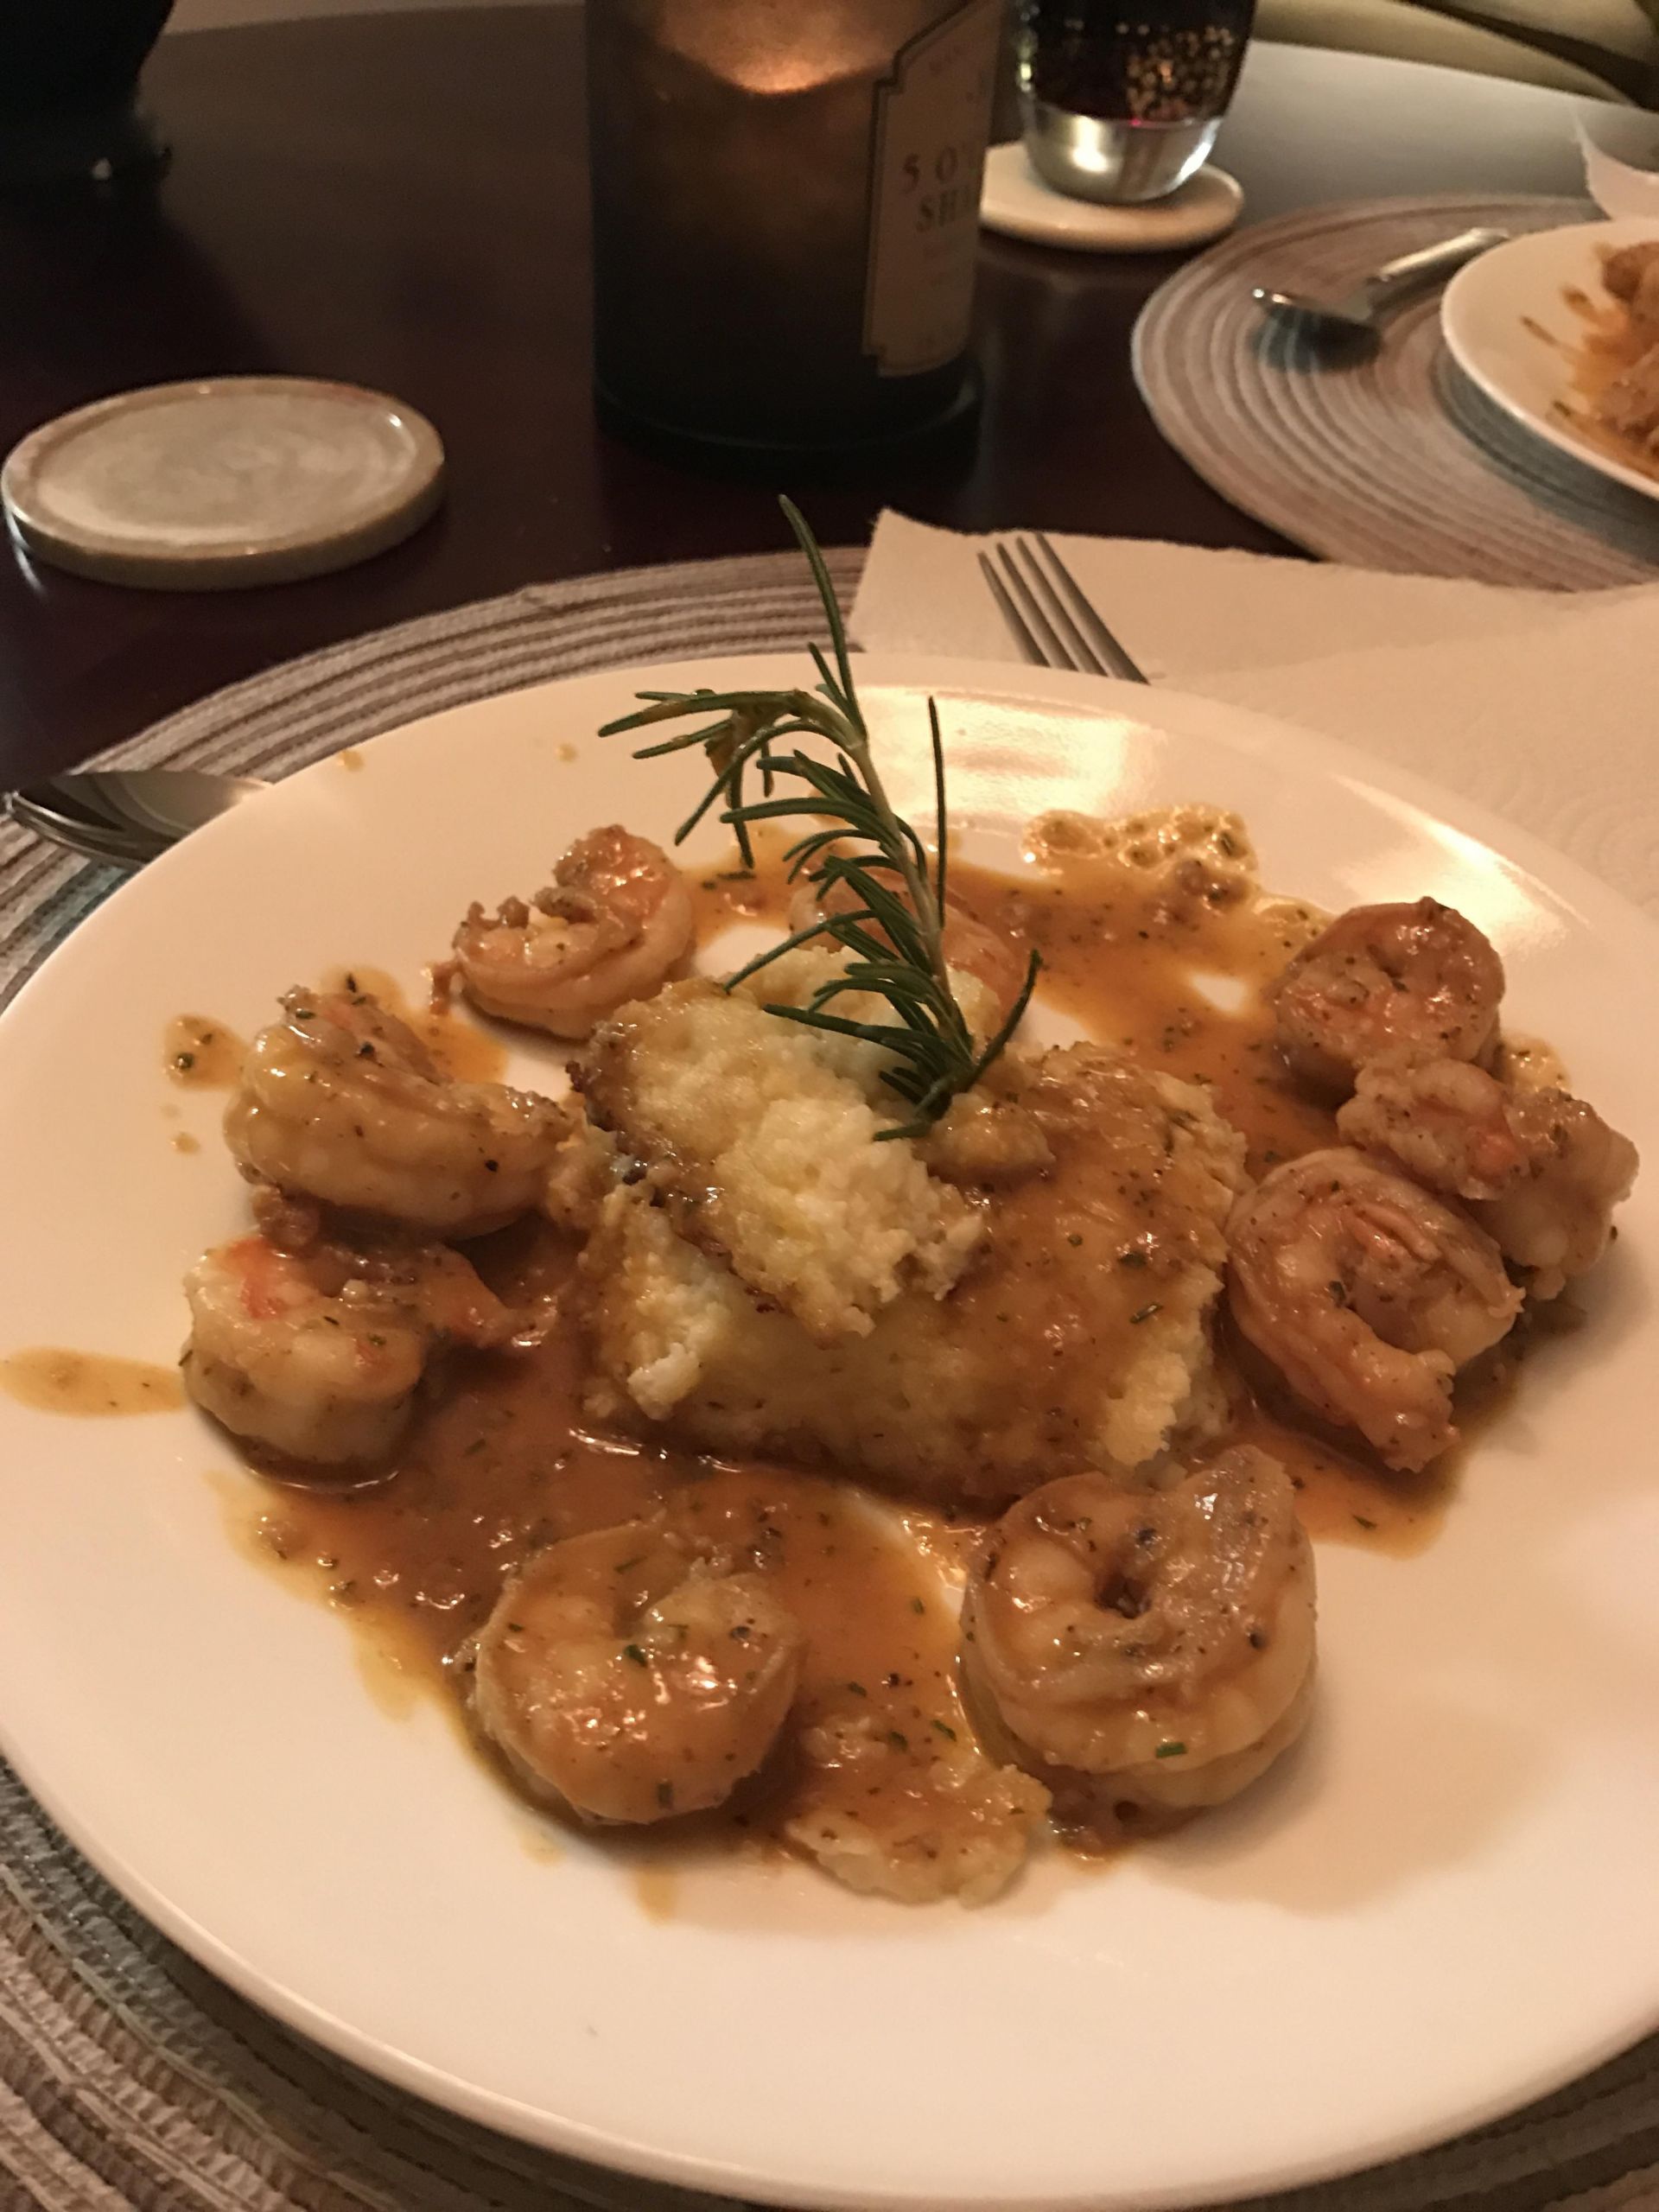 New Orleans Bbq Shrimp And Grits
 [HOMEMADE] New Orleans BBQ Shrimp and Baked Gouda Grits